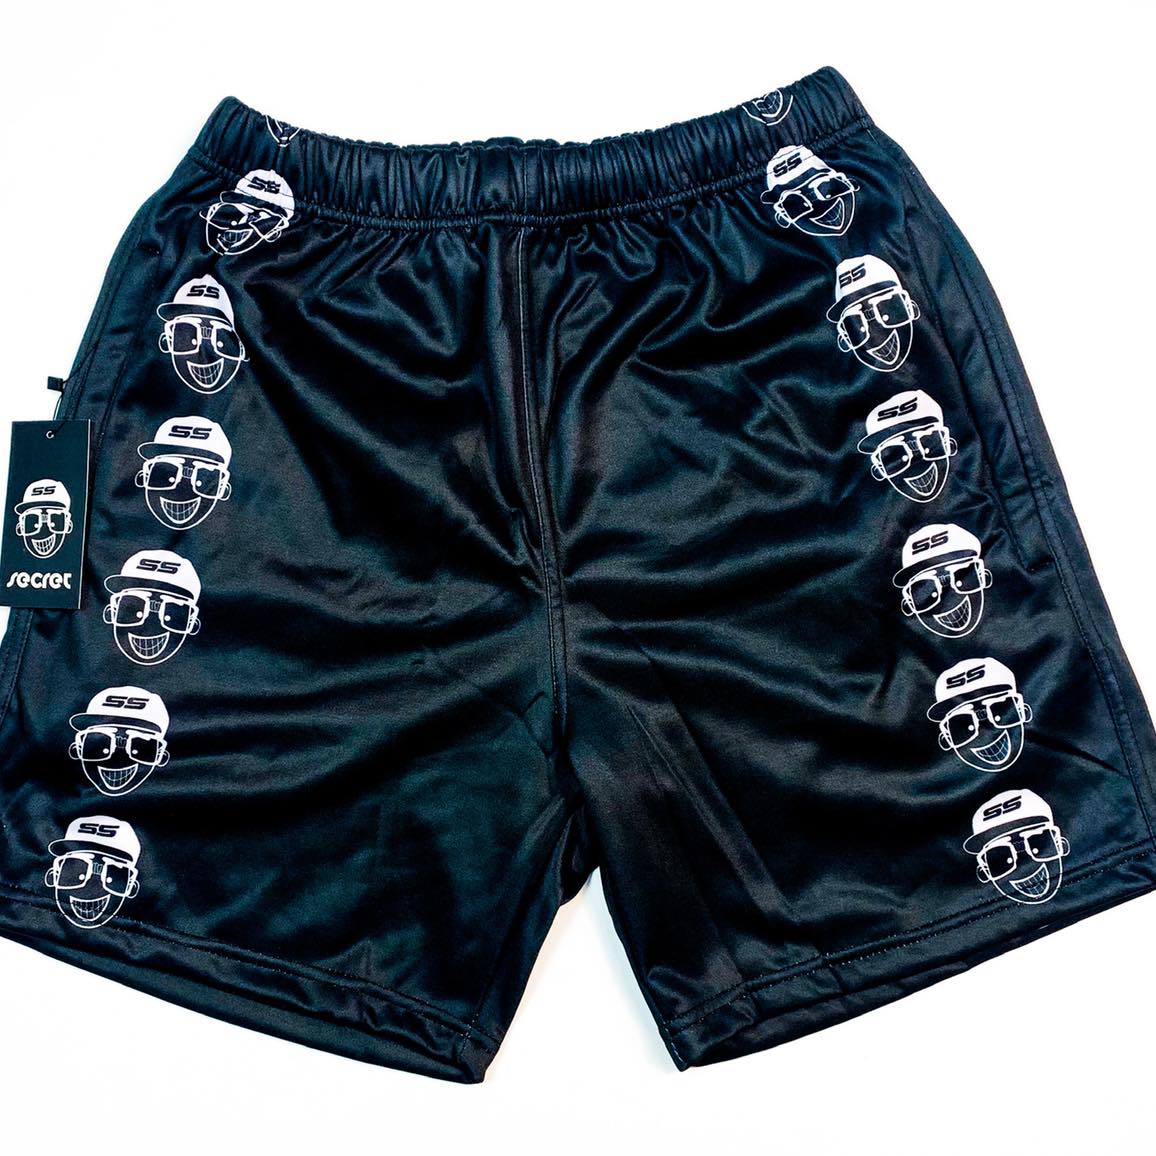 Save Big With the Secret Scientist Mystery Shorts Pack